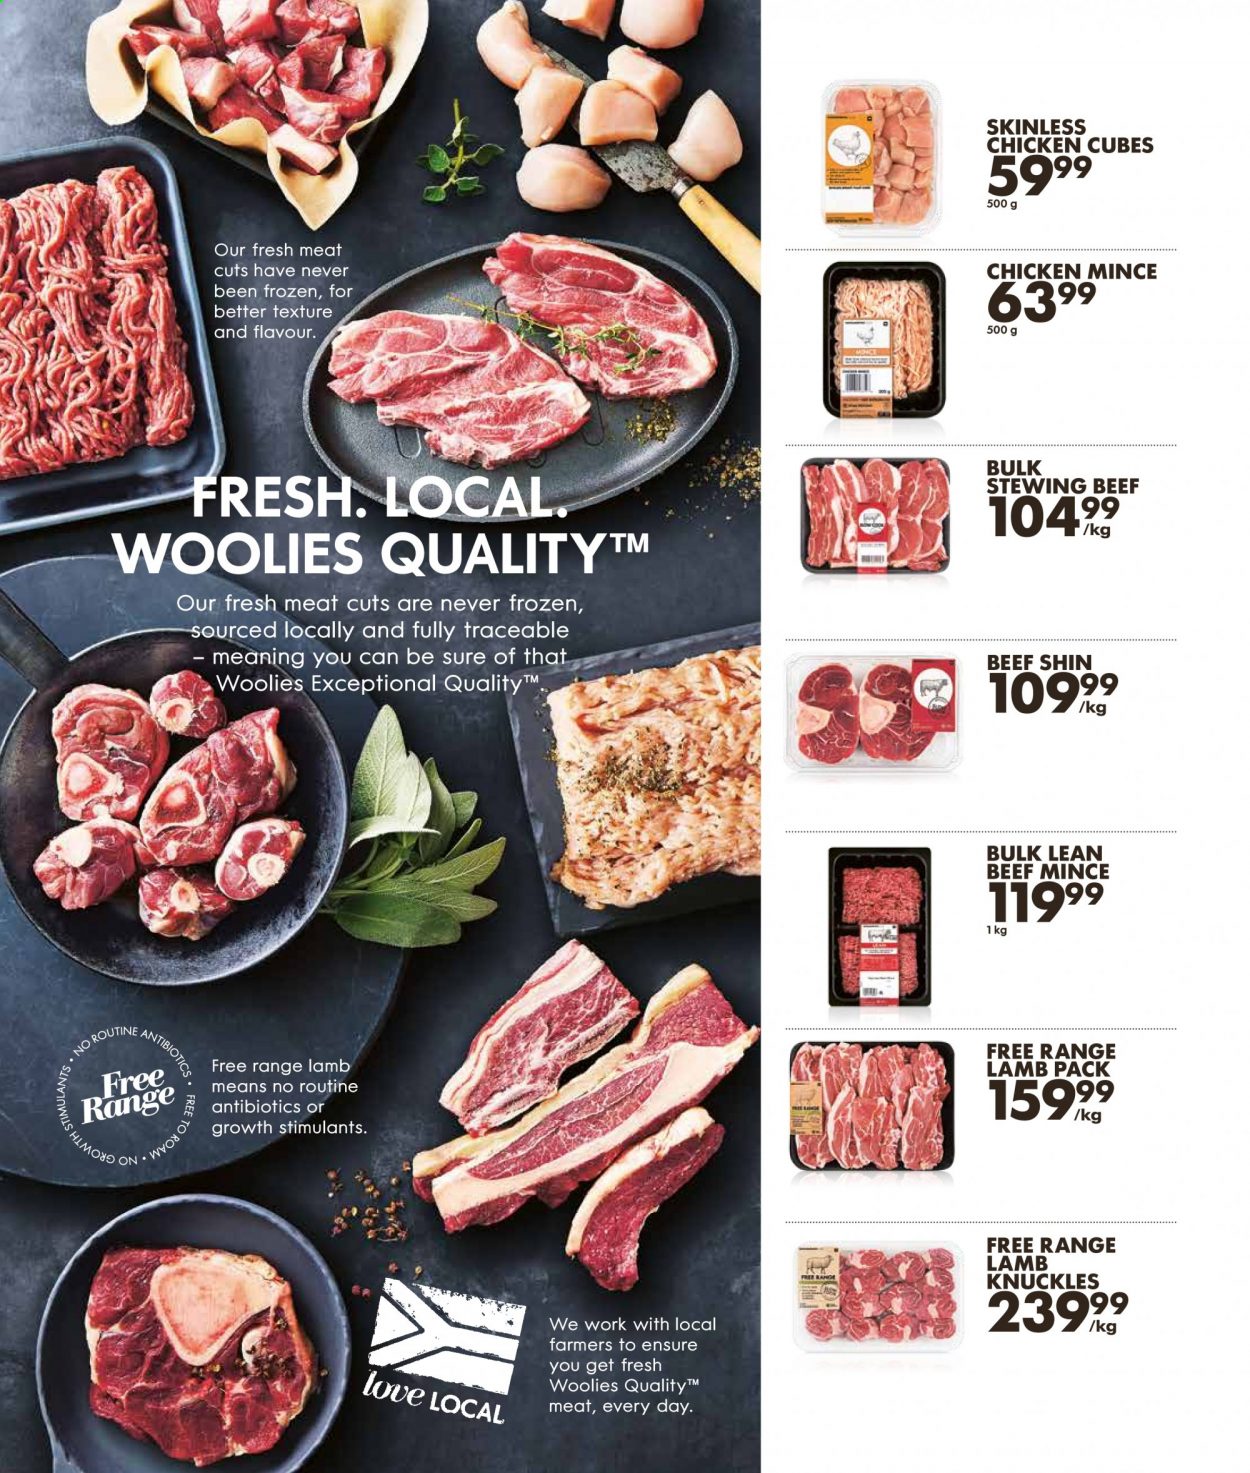 Woolworths specials - 06.07.2021 - 06.20.2021. 